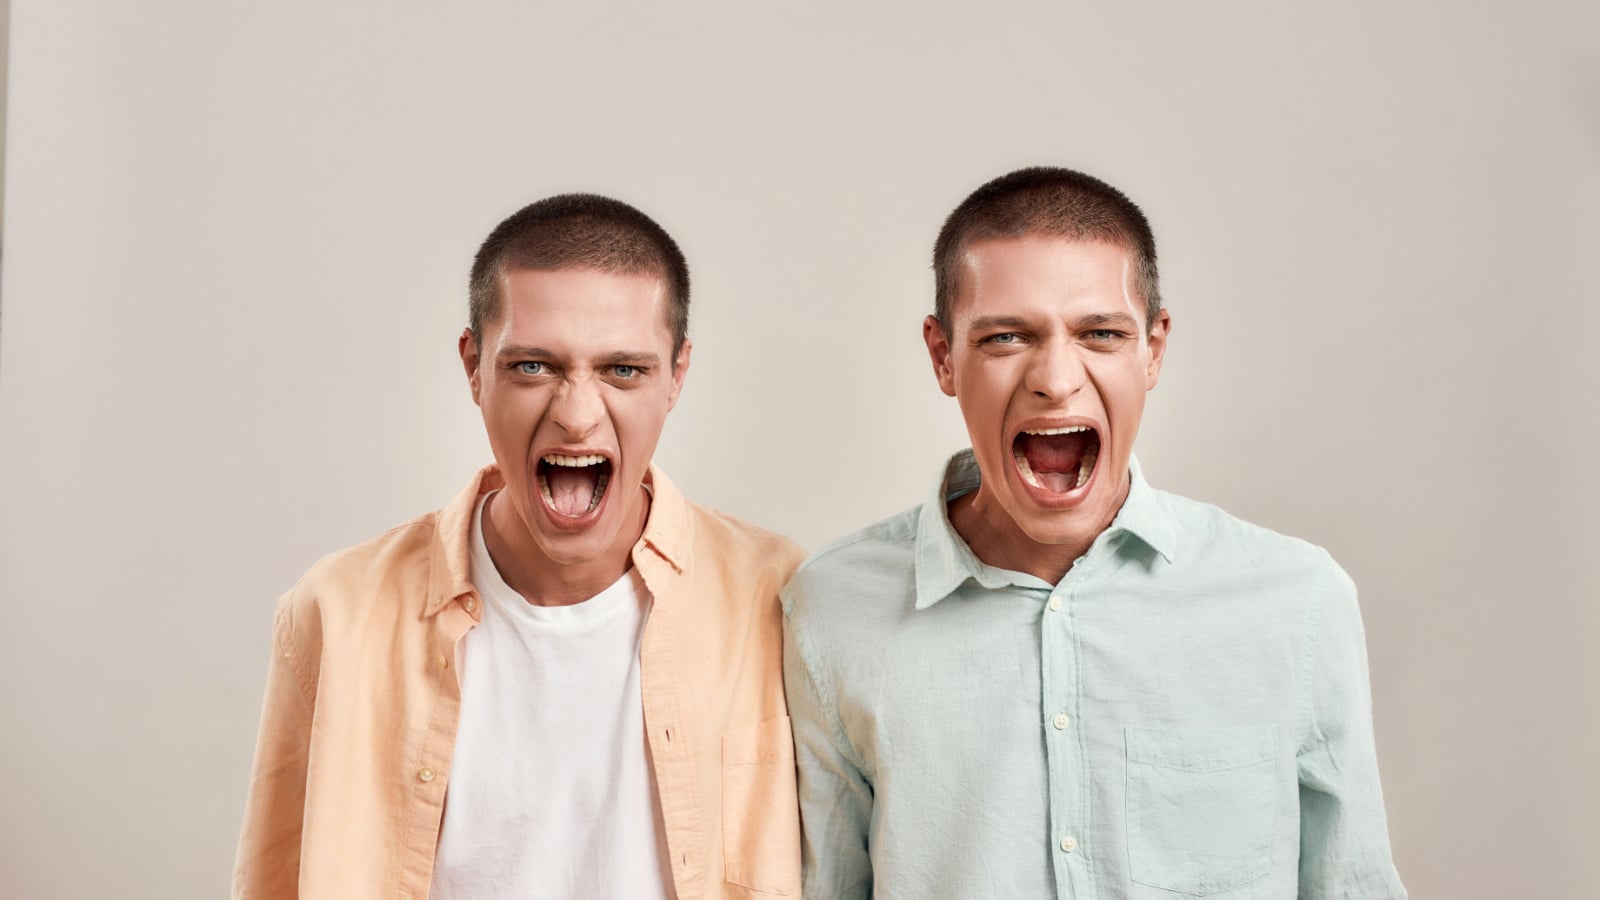 Close up portrait of two young angry twin brothers shouting and looking at camera while posing together isolated over beige background. Family relationships, human emotions